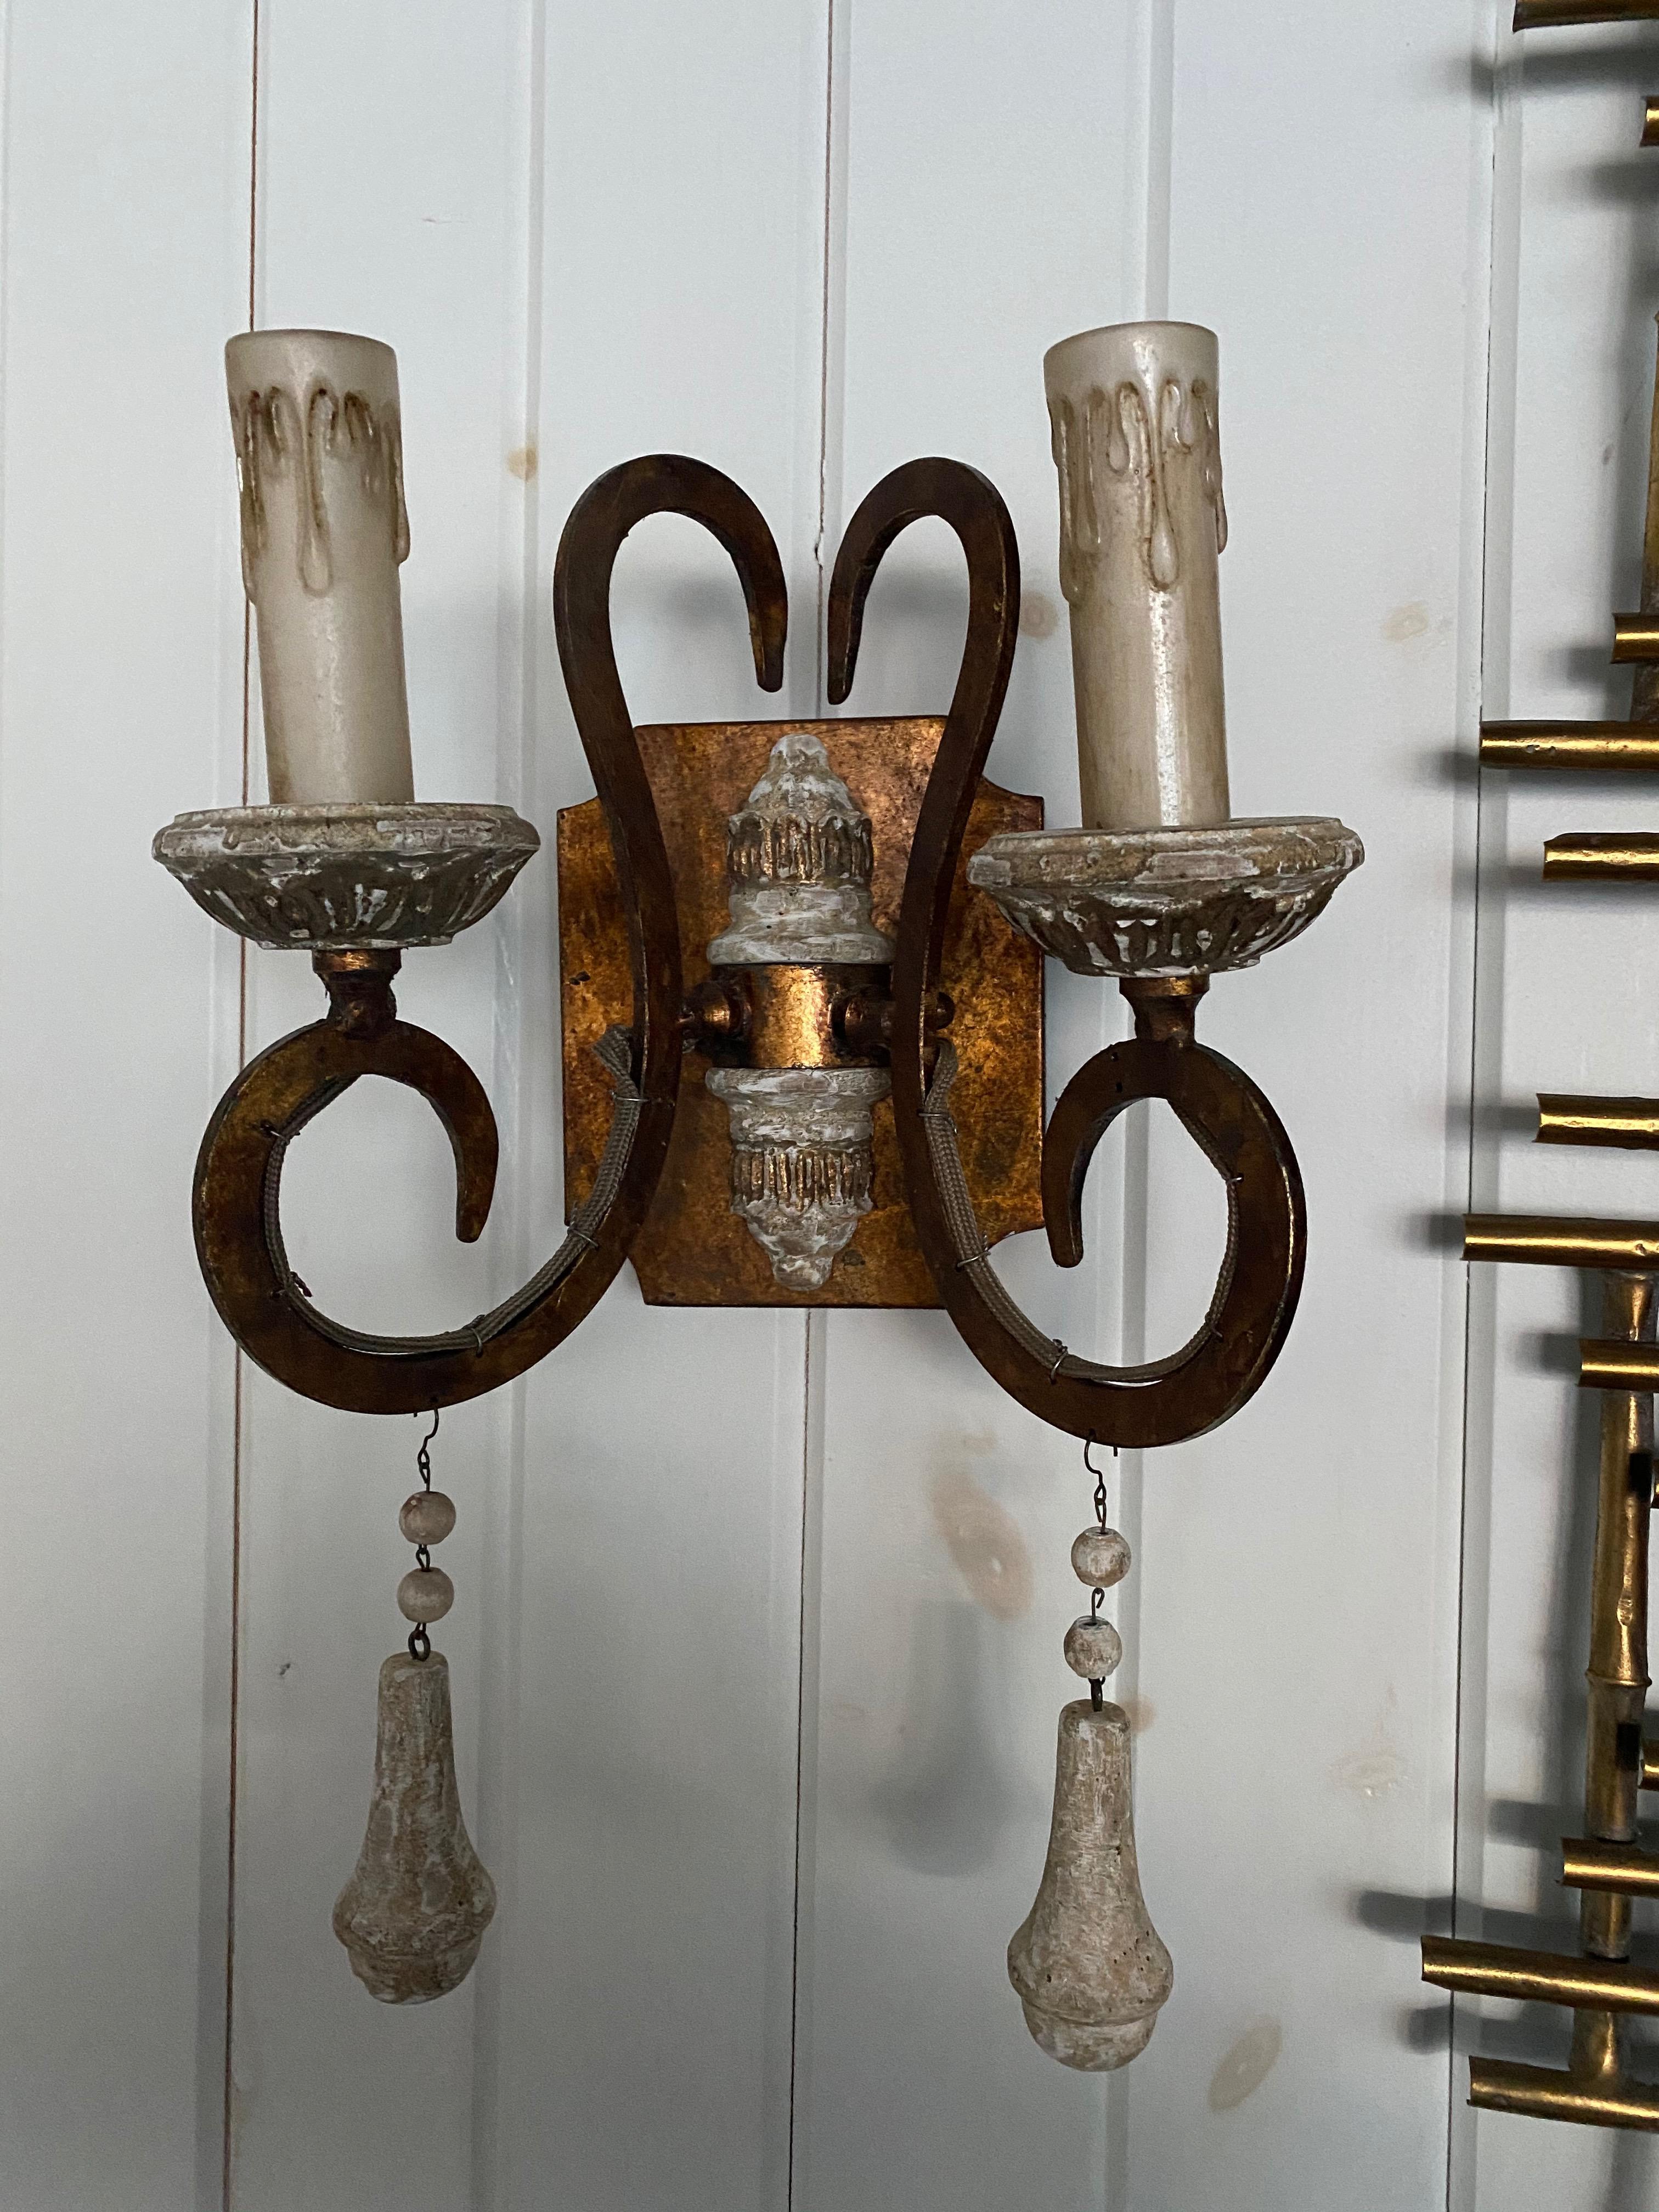 Set of six Italian style tole and carved wood two-arm sconces with wood drops. Lovely worn patina. Newly wired and ready for installation. Priced per sconce.